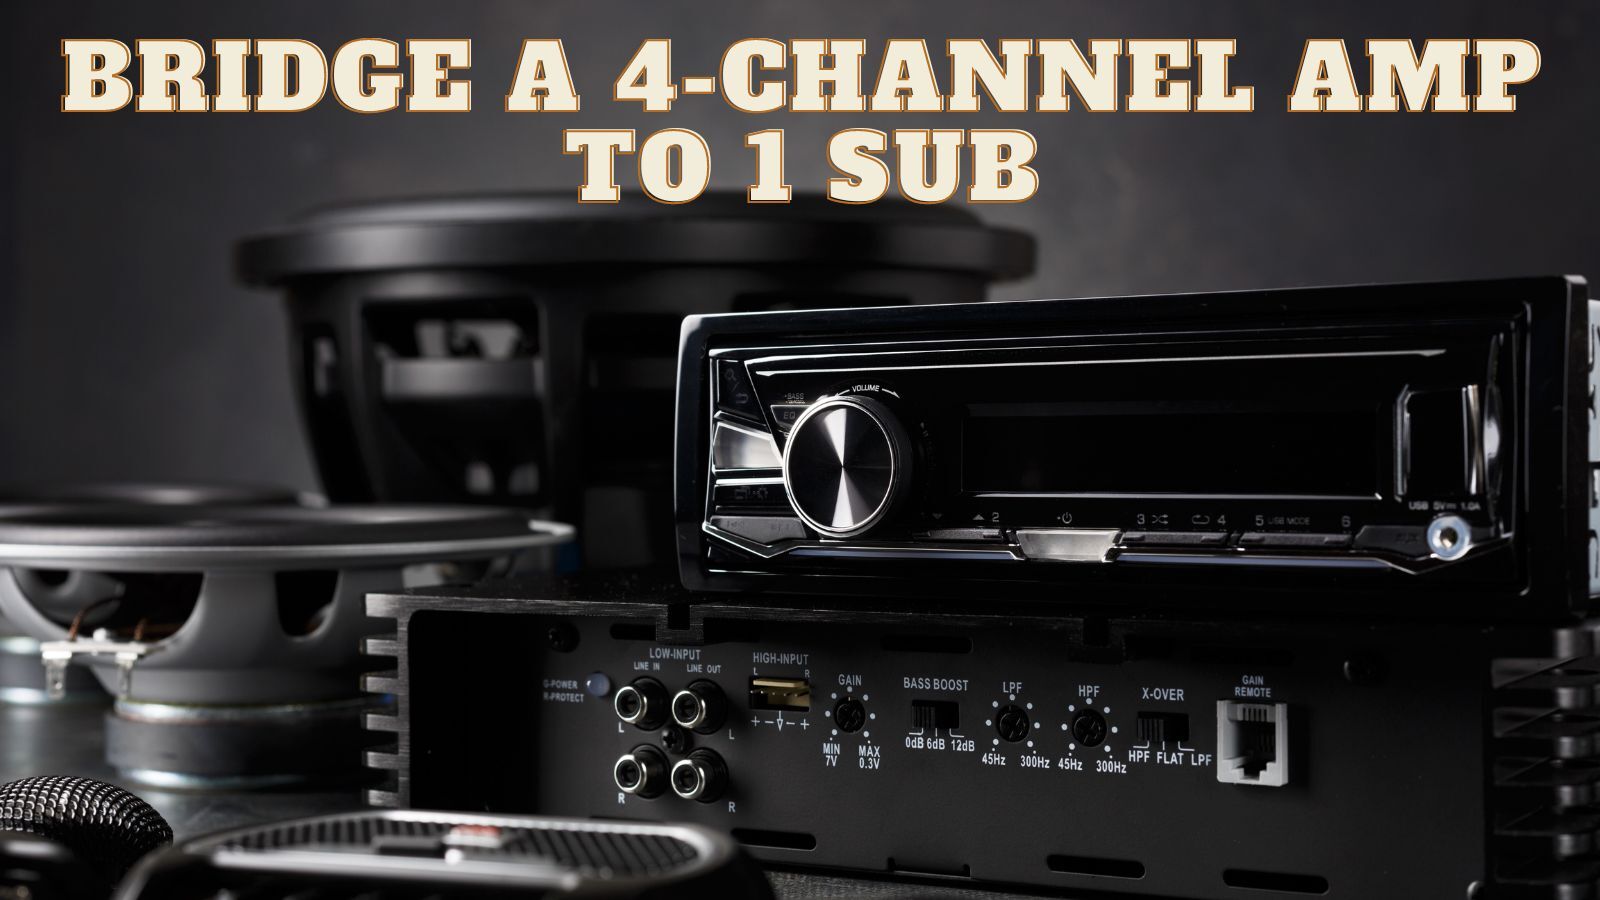 How to Bridge a 4-Channel Amp to 1 Sub?